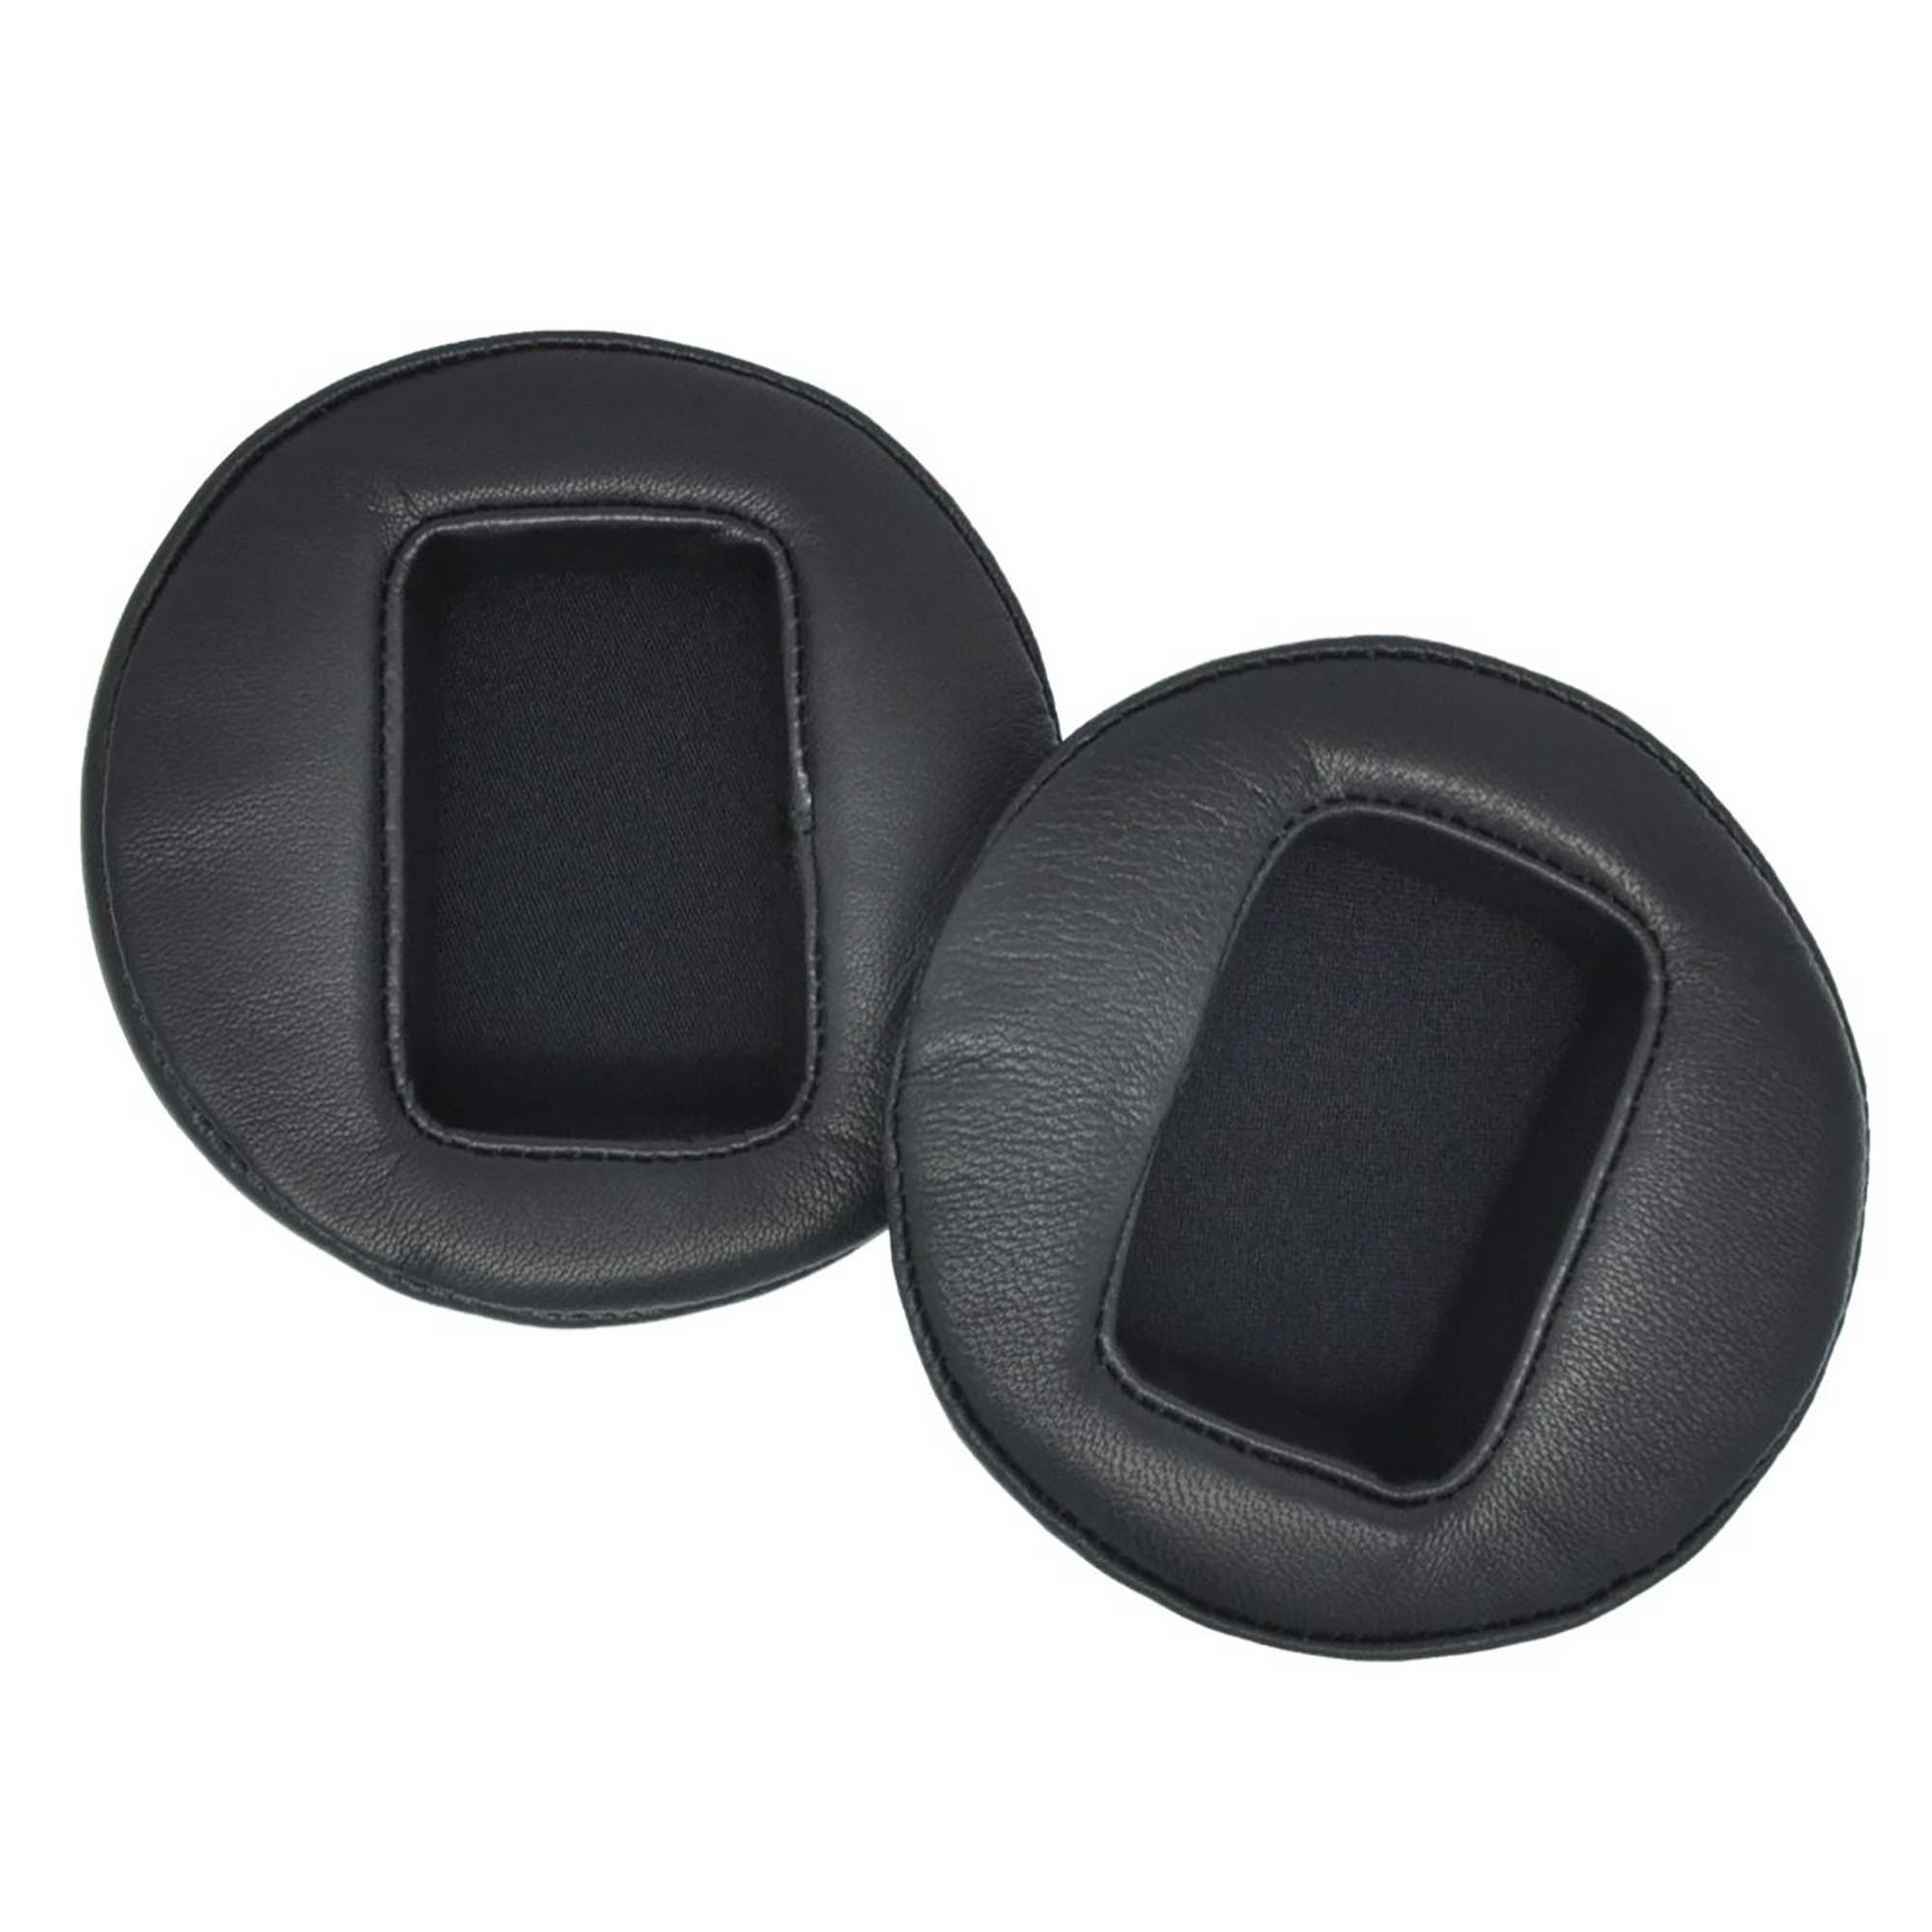 Dan Clark Audio ETHER and VOCE Angled Replacement Ear Pads